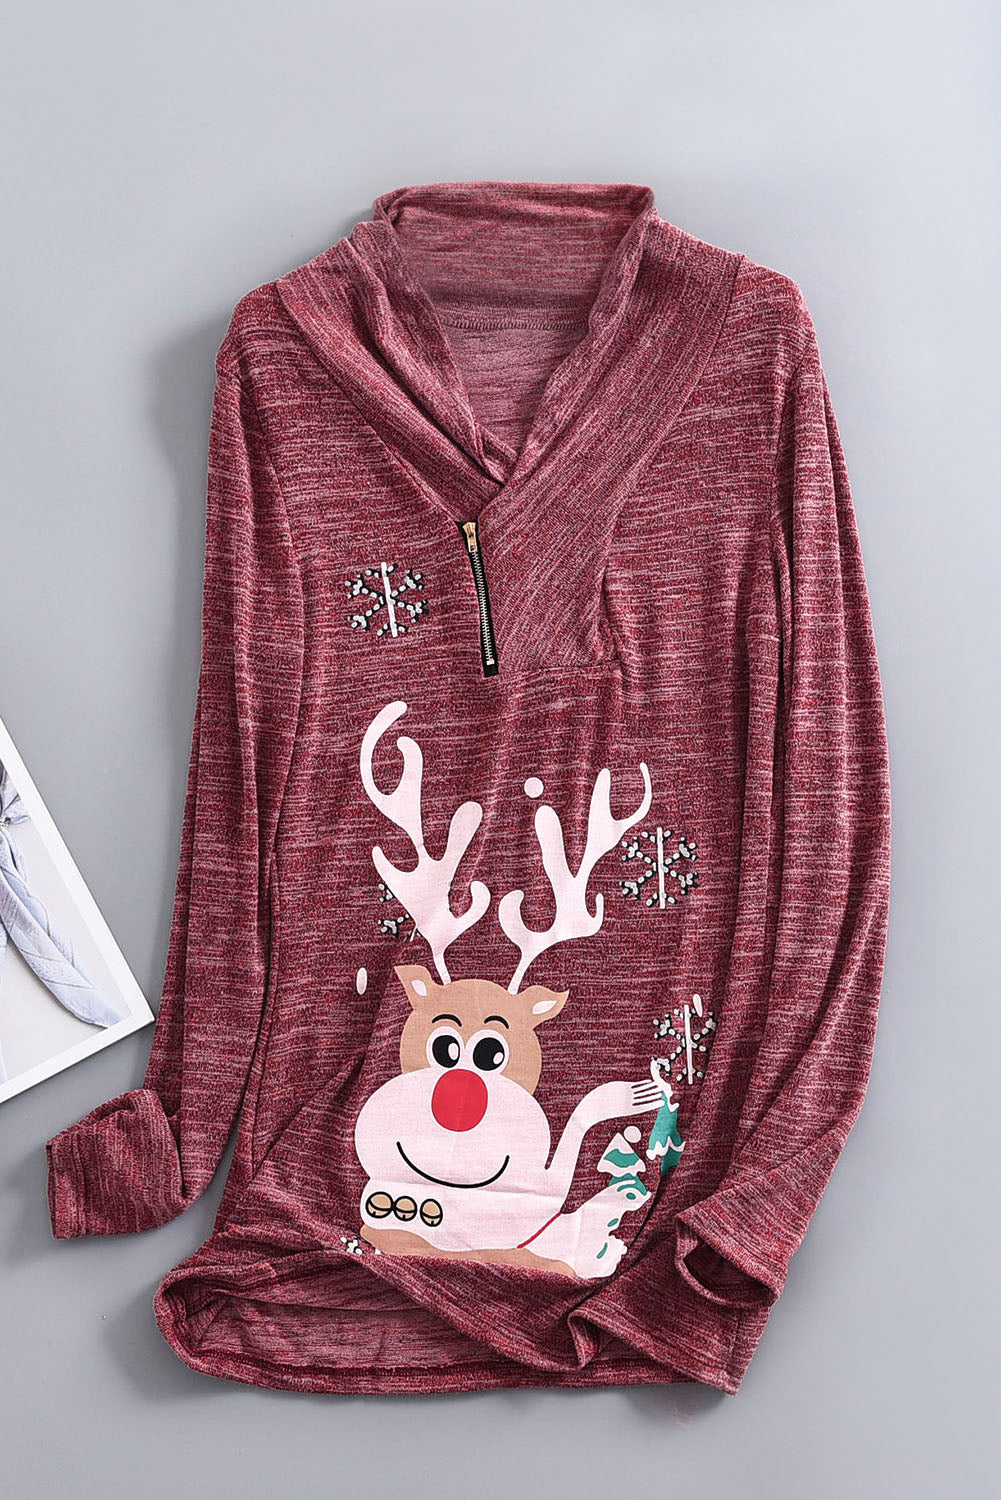 Red Women's Casual Fashion Top Cowl Neck Zipped Pullover Christmas Reindeer Snow Print Sweatshirt  LC252977-3